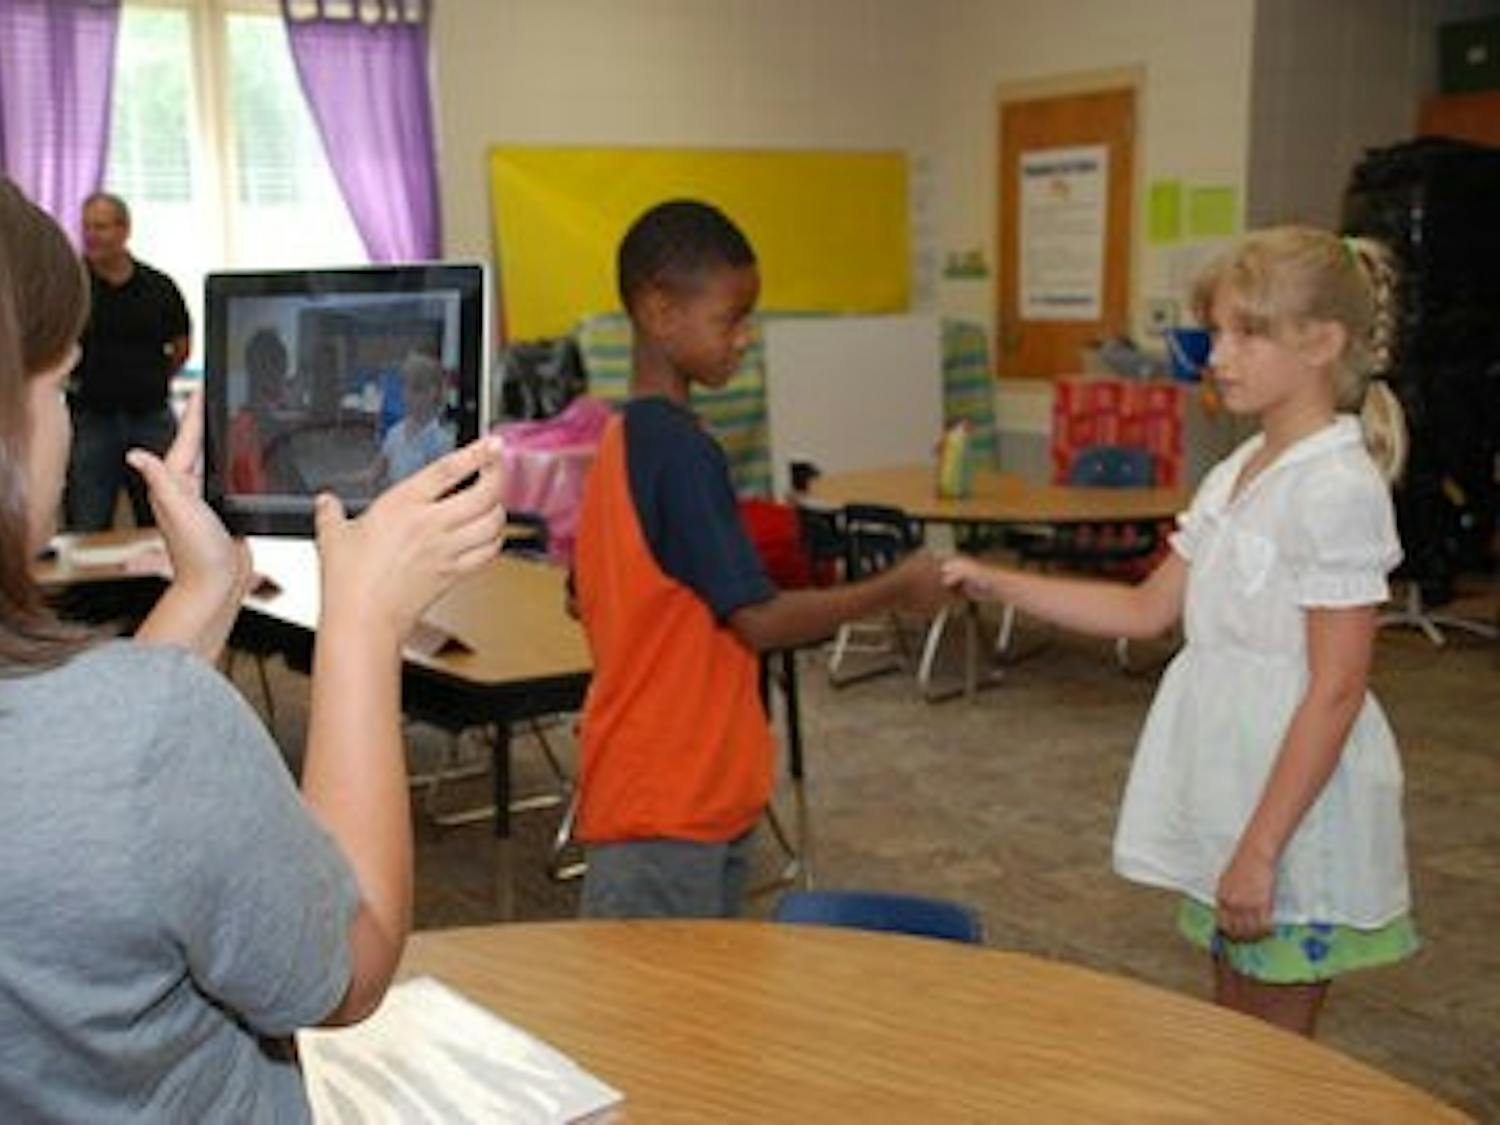 Graduate student Lacey Faciane uses an iPad 2 to record a "social story'' acted out by two children during summer program.( Contributed by AU News)